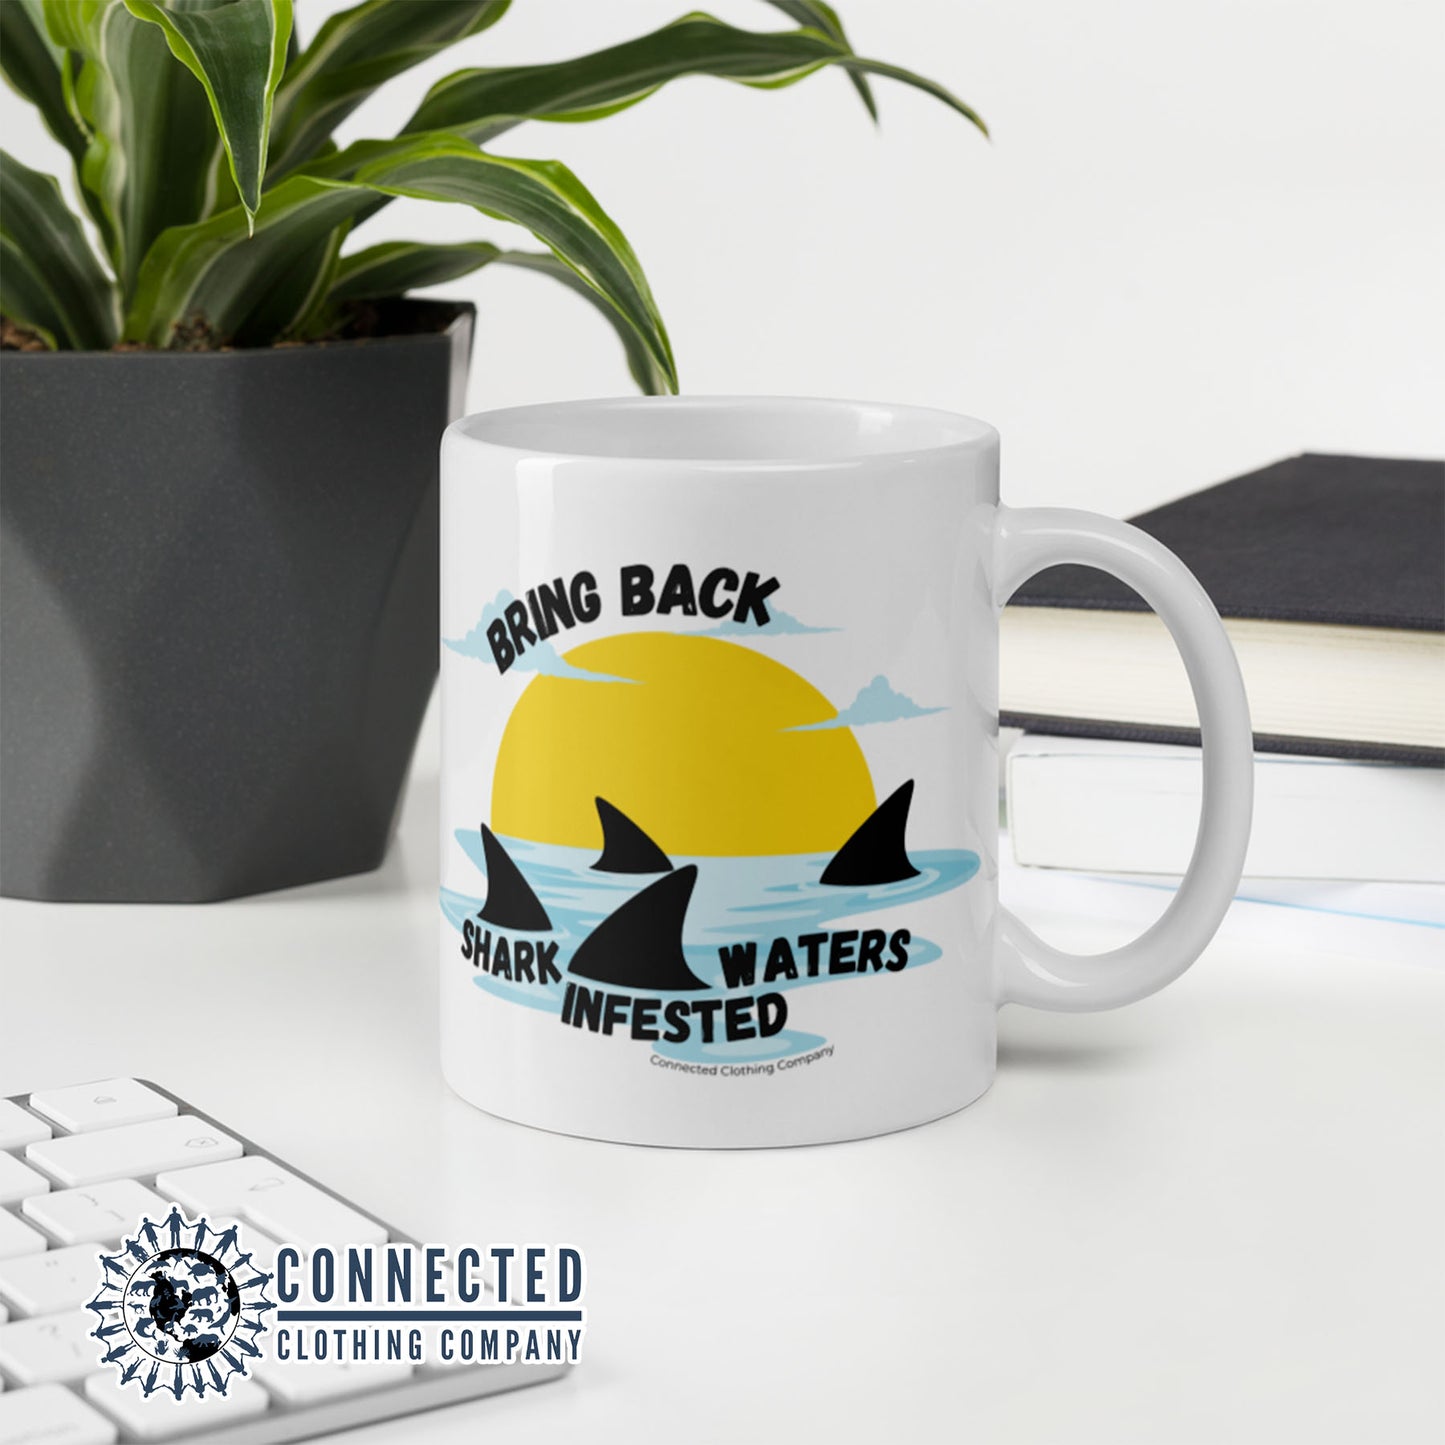 Bring Back Shark Infested Waters Classic Mug - Connected Clothing Company - Ethically and Sustainably Made - 10% of profits donated to shark conservation and ocean conservation